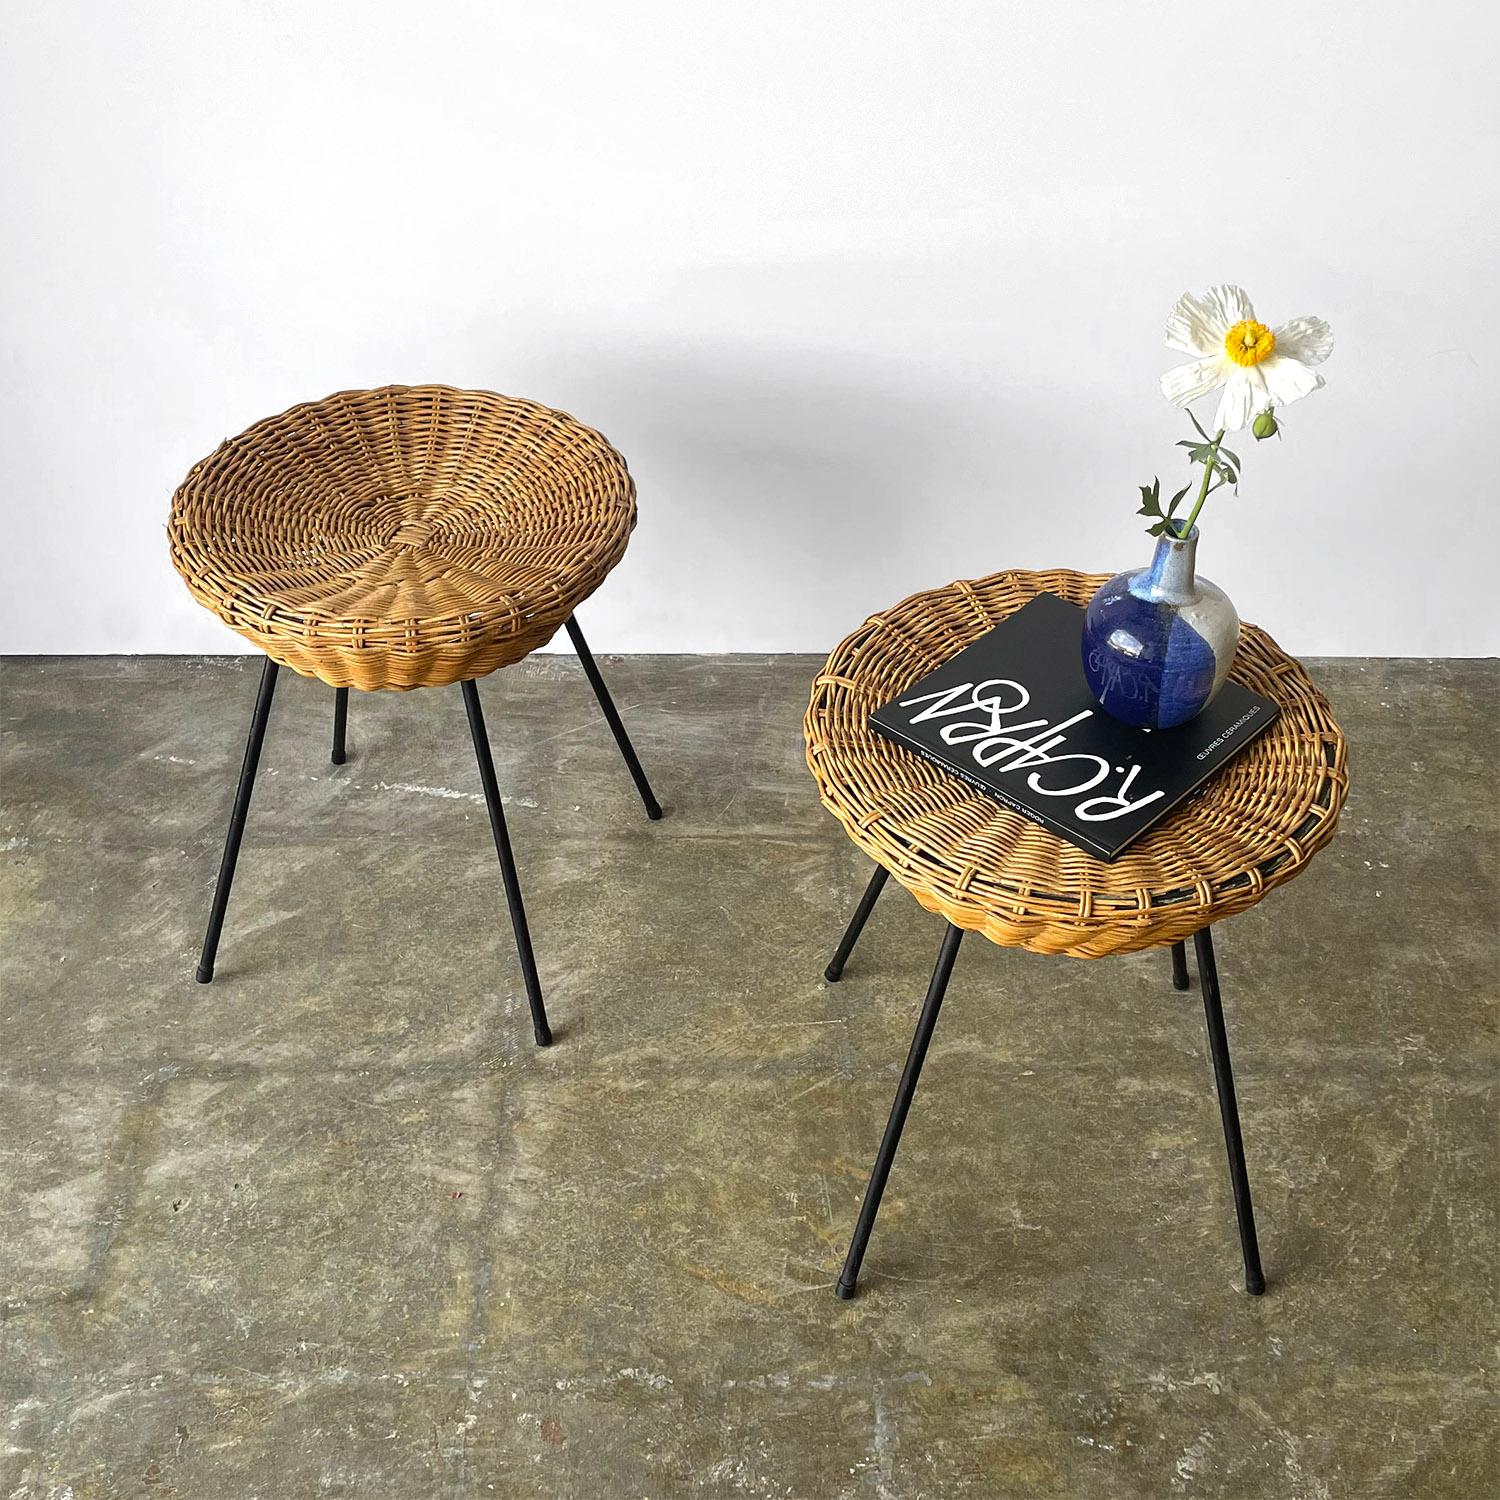 Pair of Italian wicker and iron stools
Italy, circa 1950’s
Curved wicker seat sits on top of thin iron splayed legs
Delicate yet sturdy
Minor wicker imperfections
Natural color variations
Patina from age and use
Priced and sold as a pair.